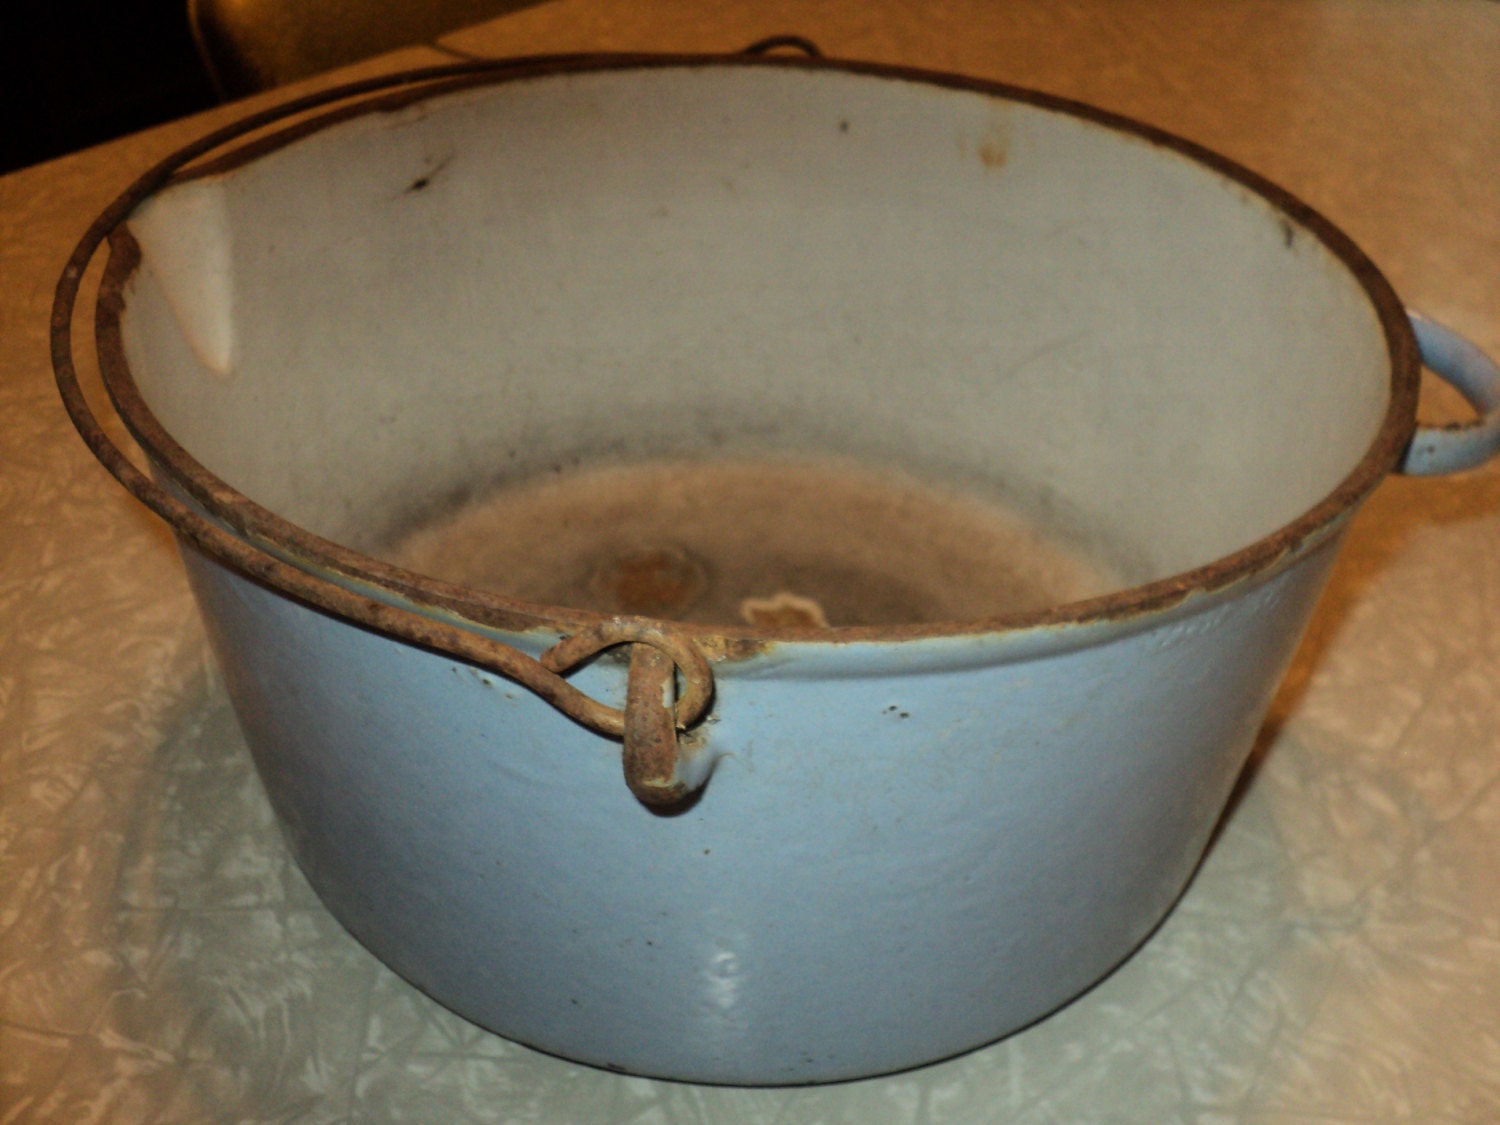 Enamel Pot with Right-Side Pouring Spout